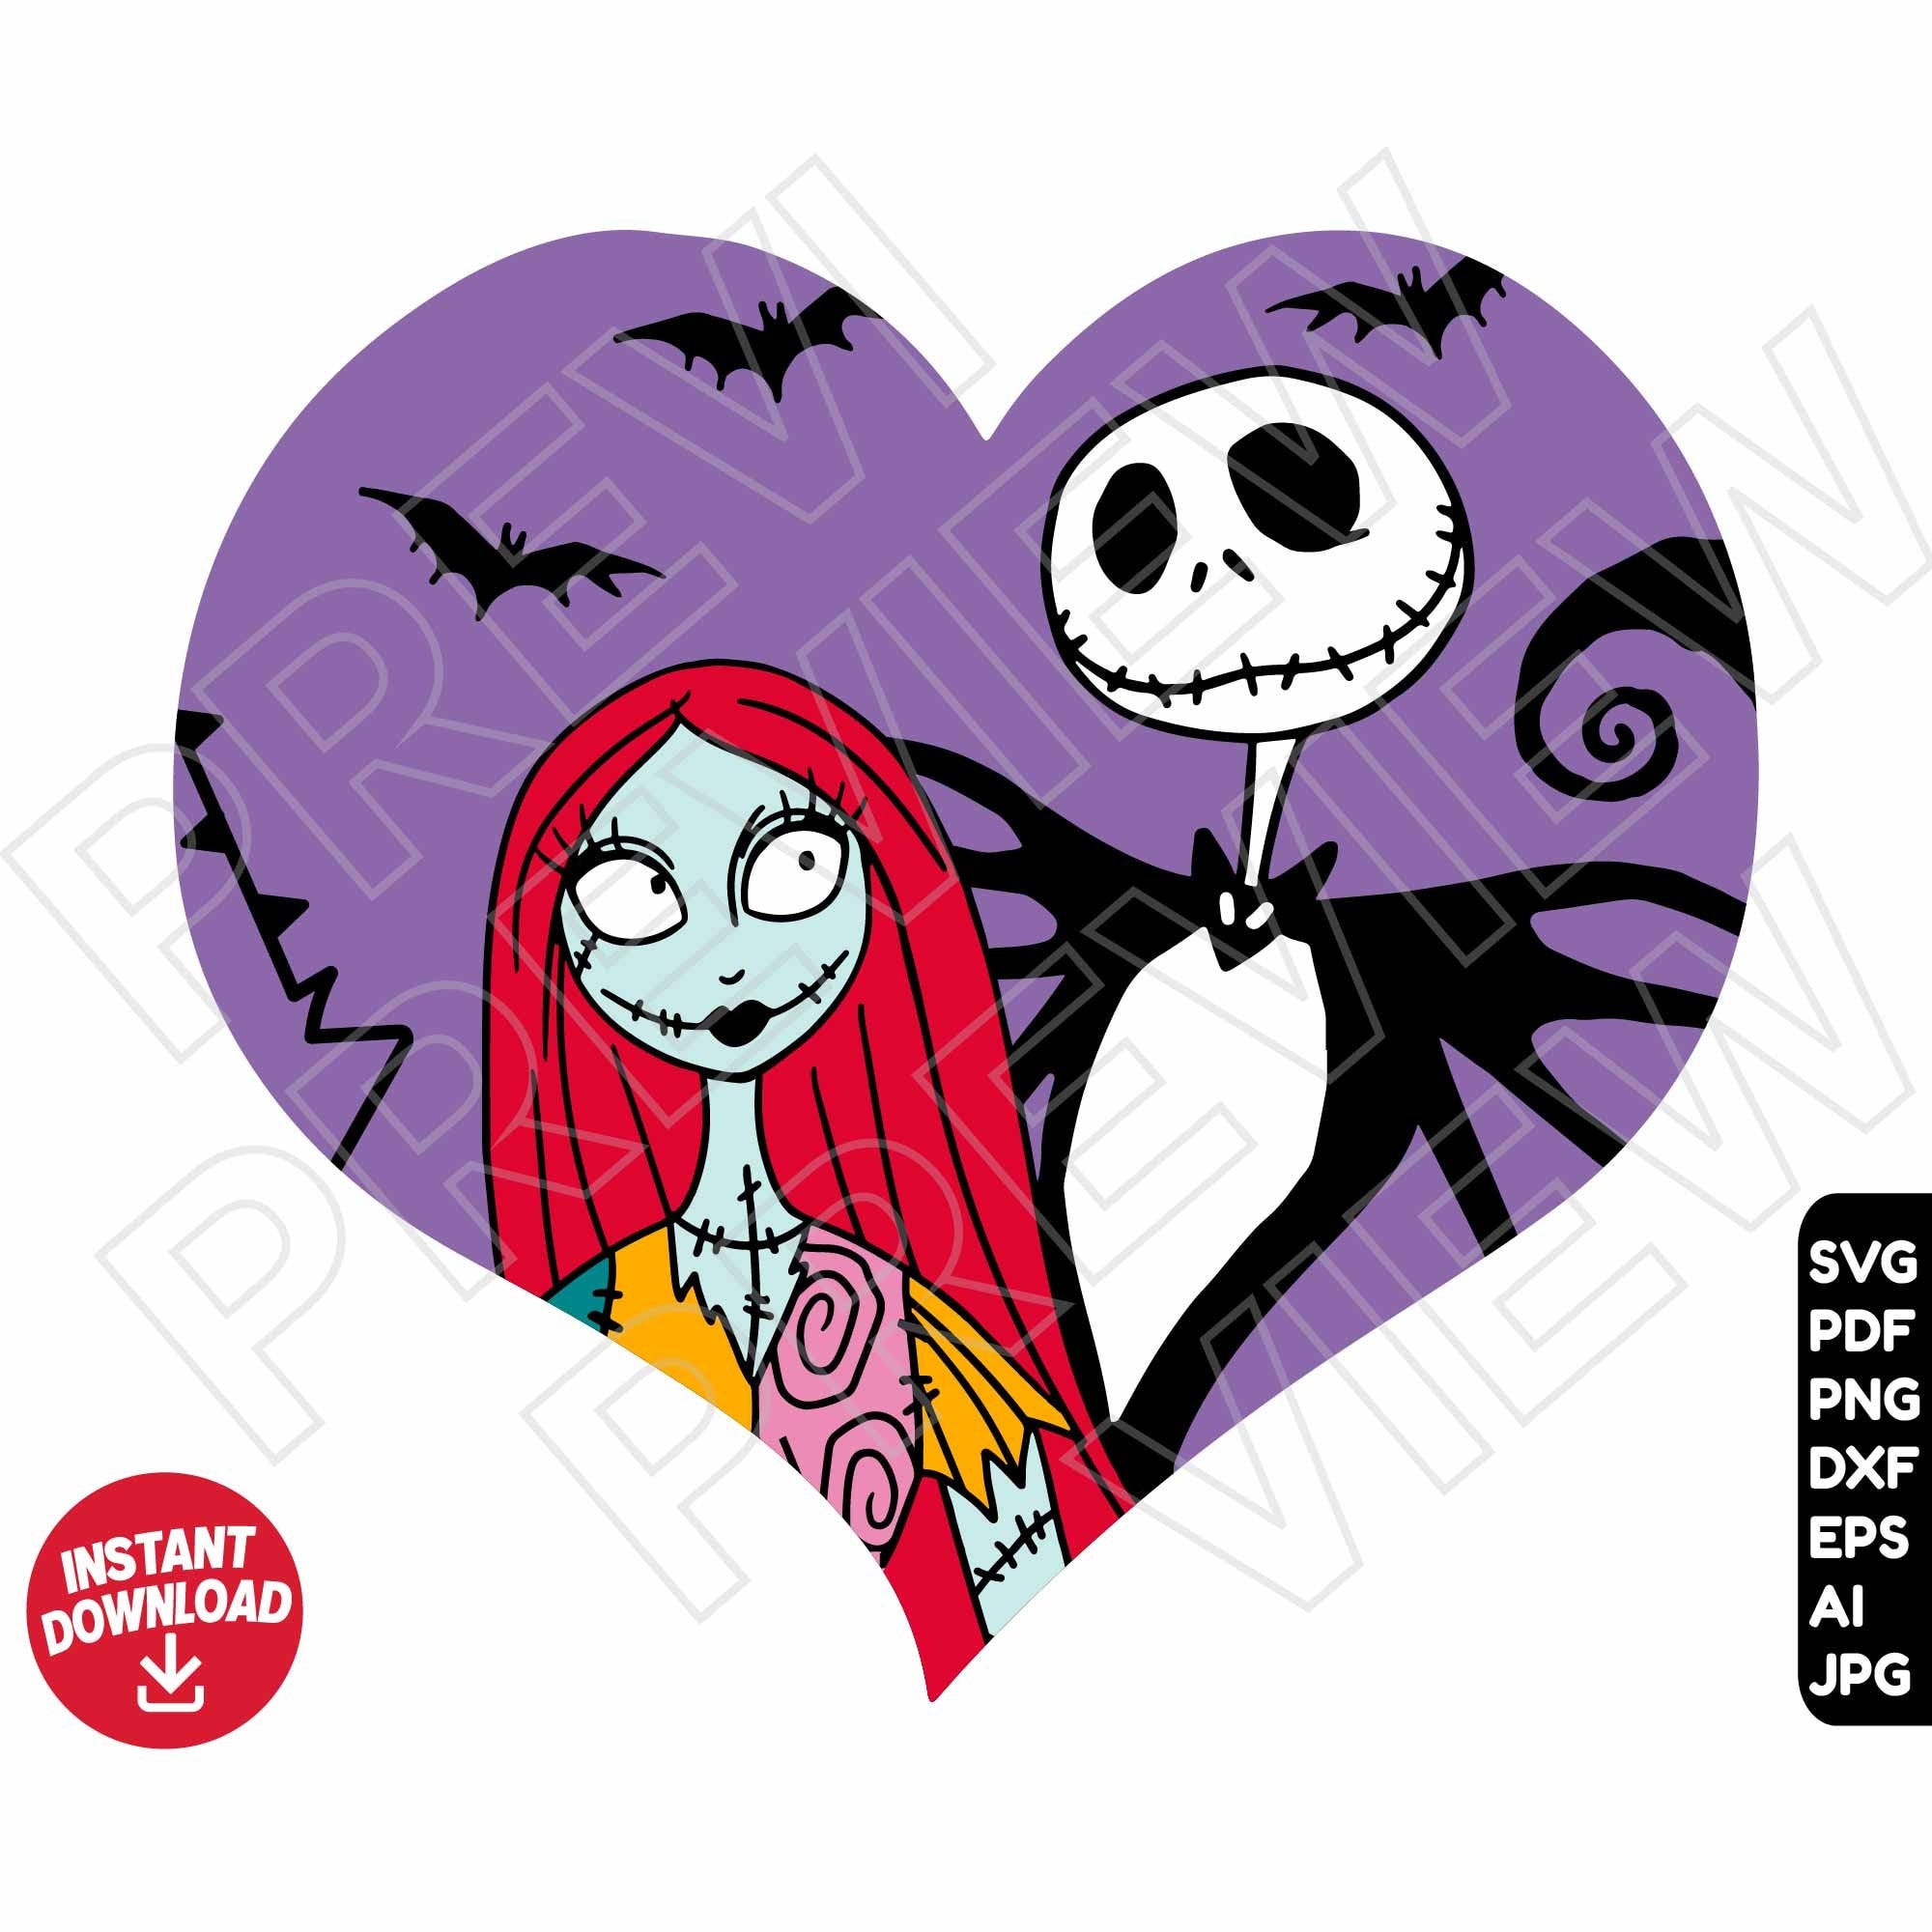 The Nightmare Before Christmas SVG Jack Sally , Halloween , love , dxf png clipart , cut file layered by color